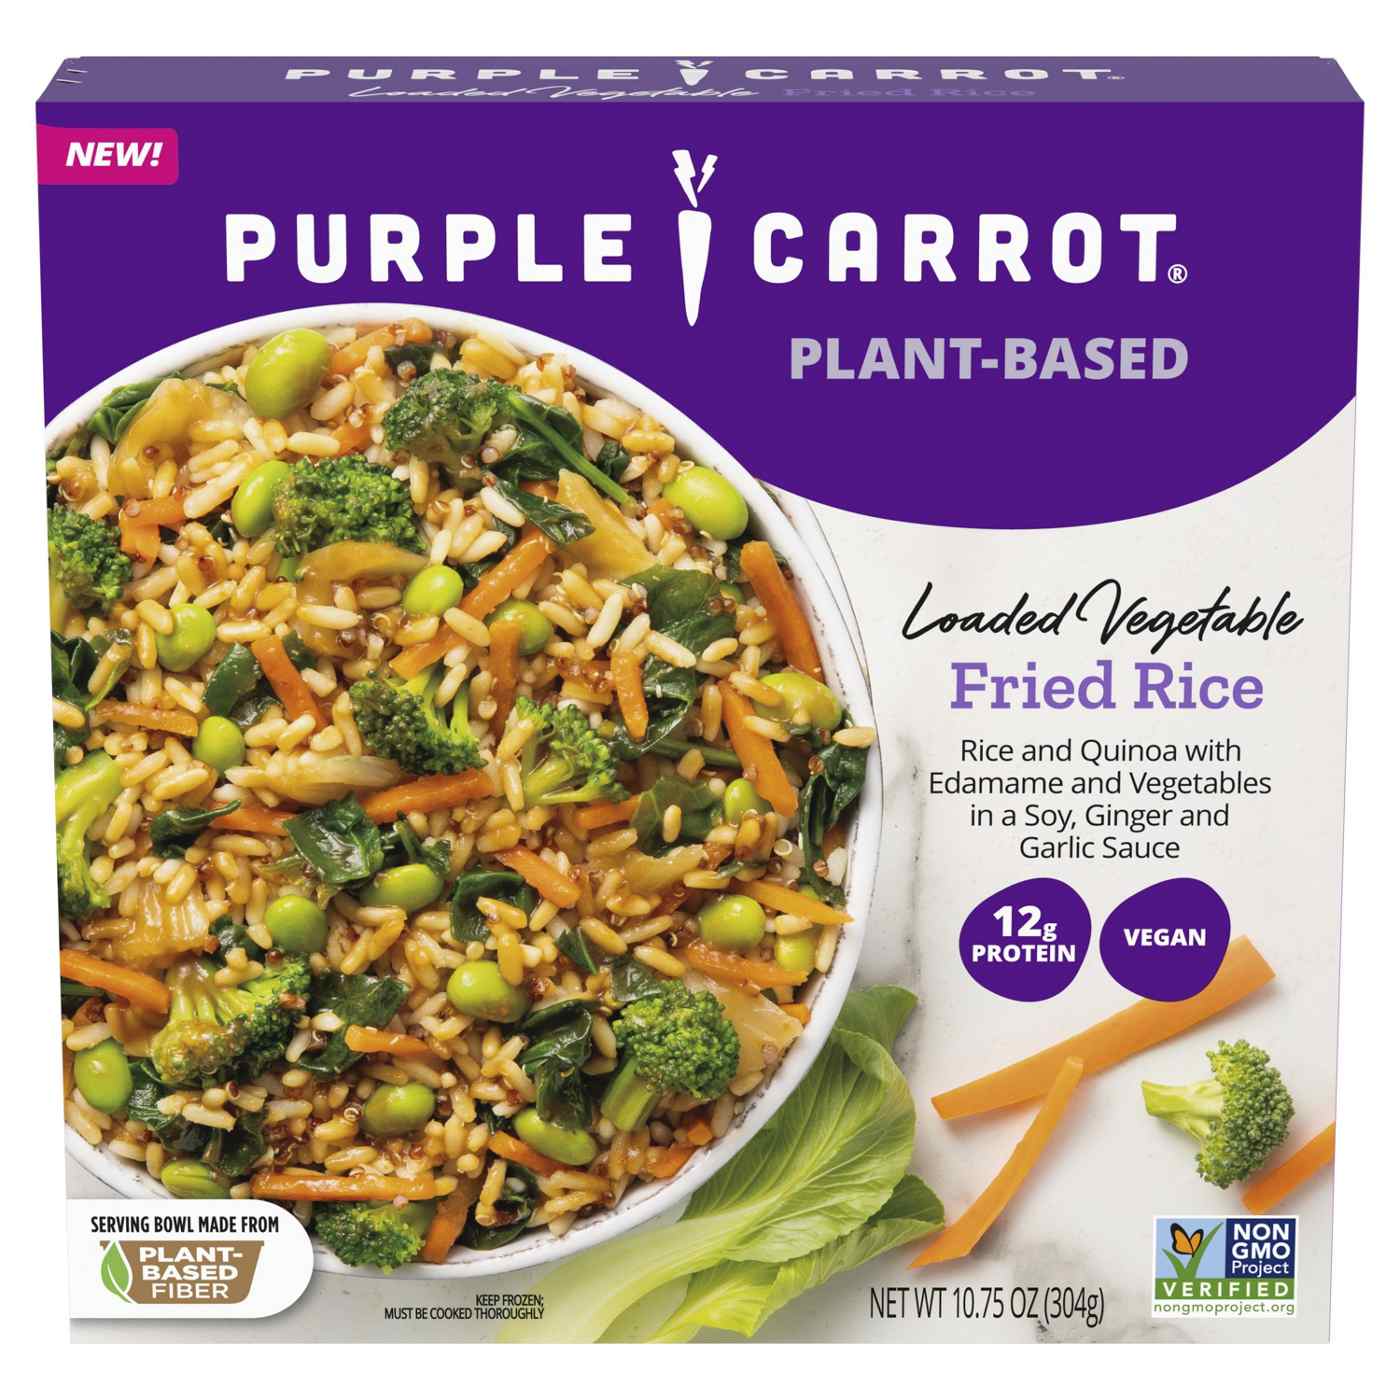 Purple Carrot Plant-Based Loaded Vegetable Fried Rice Frozen Meal; image 1 of 4